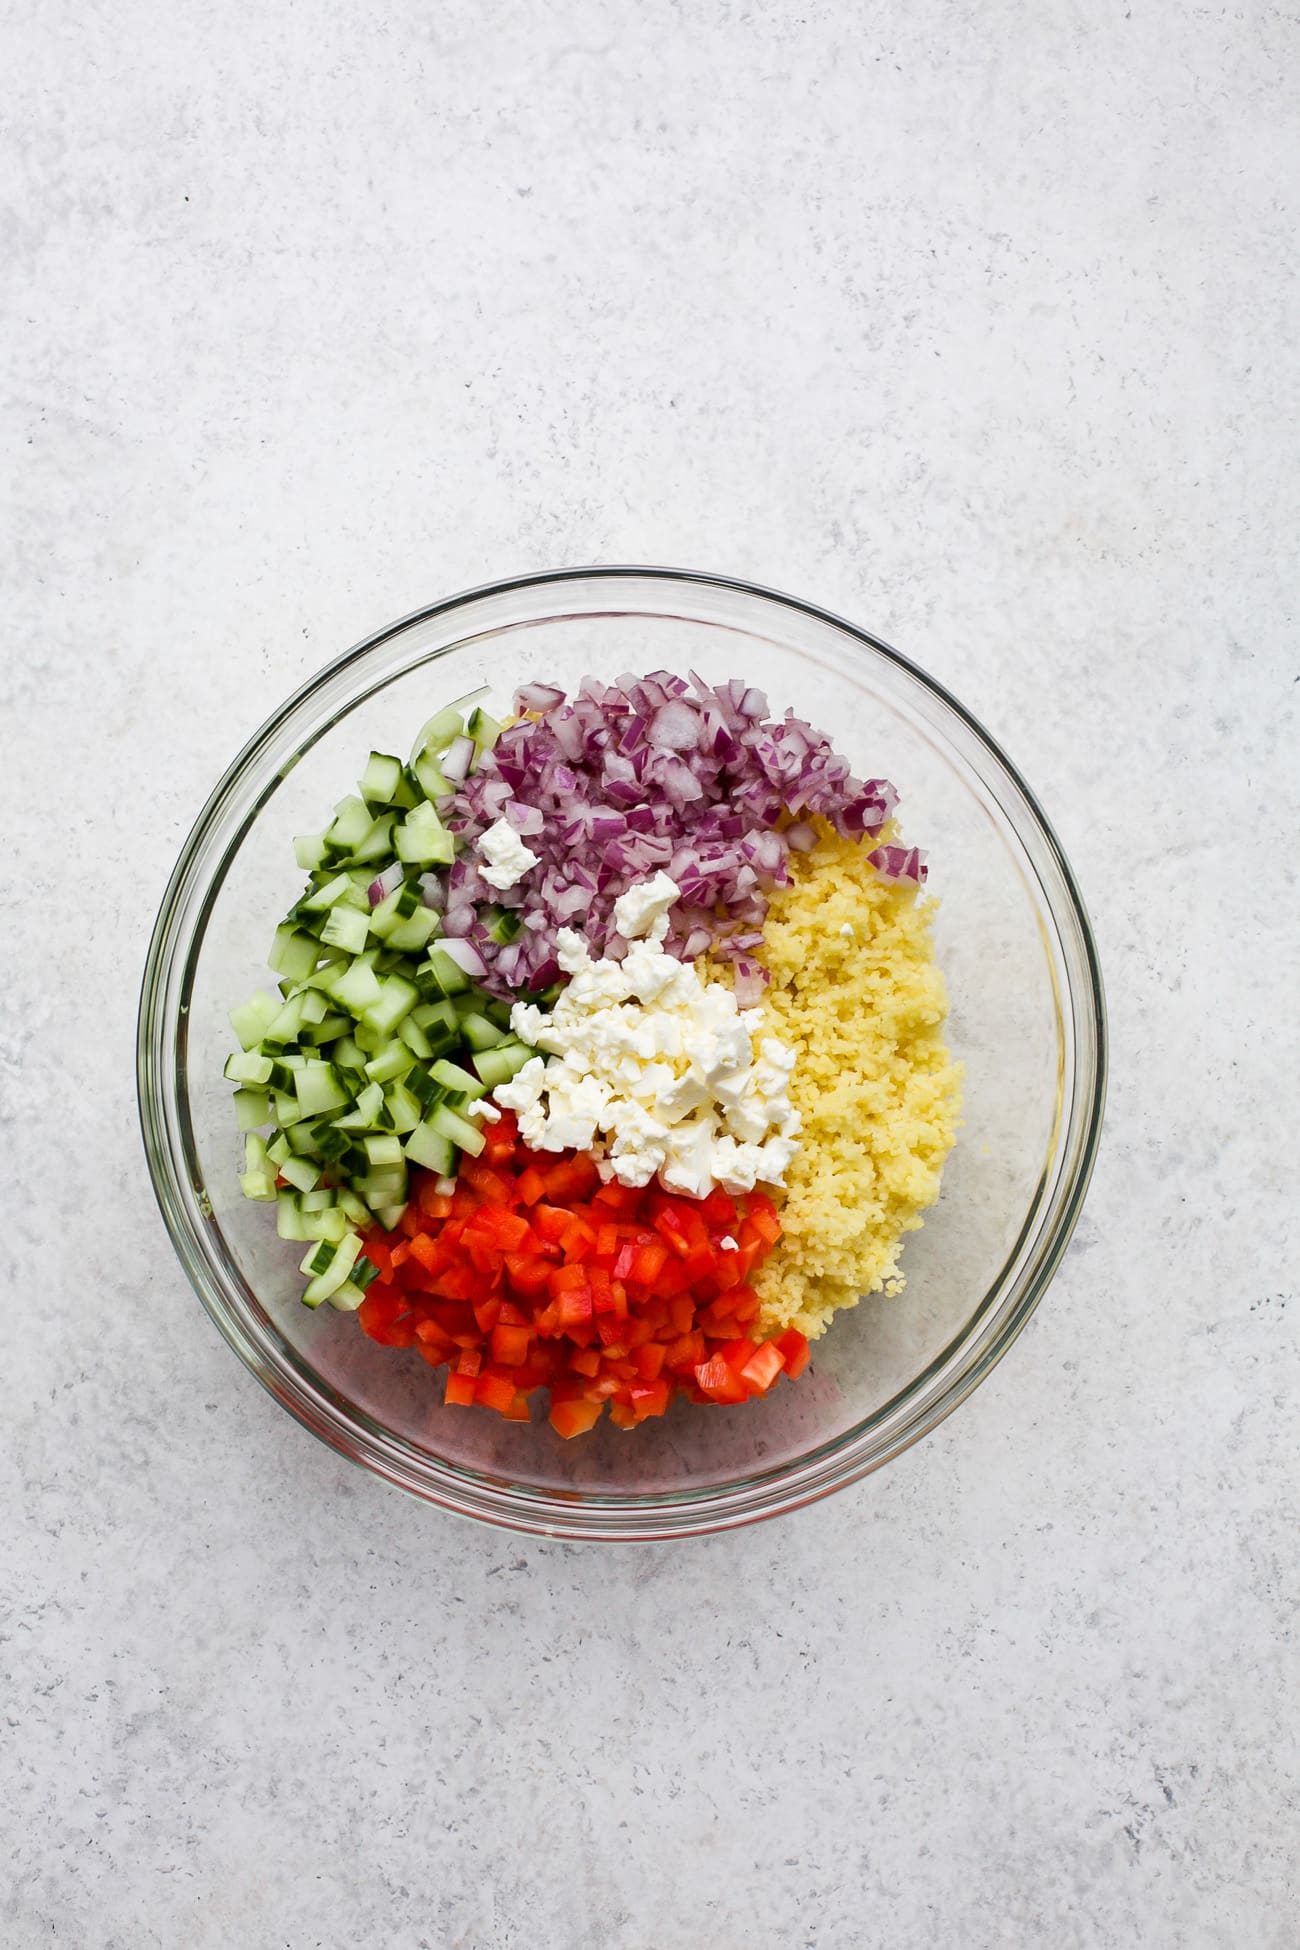 Salad ingredients measured into a large bowl.